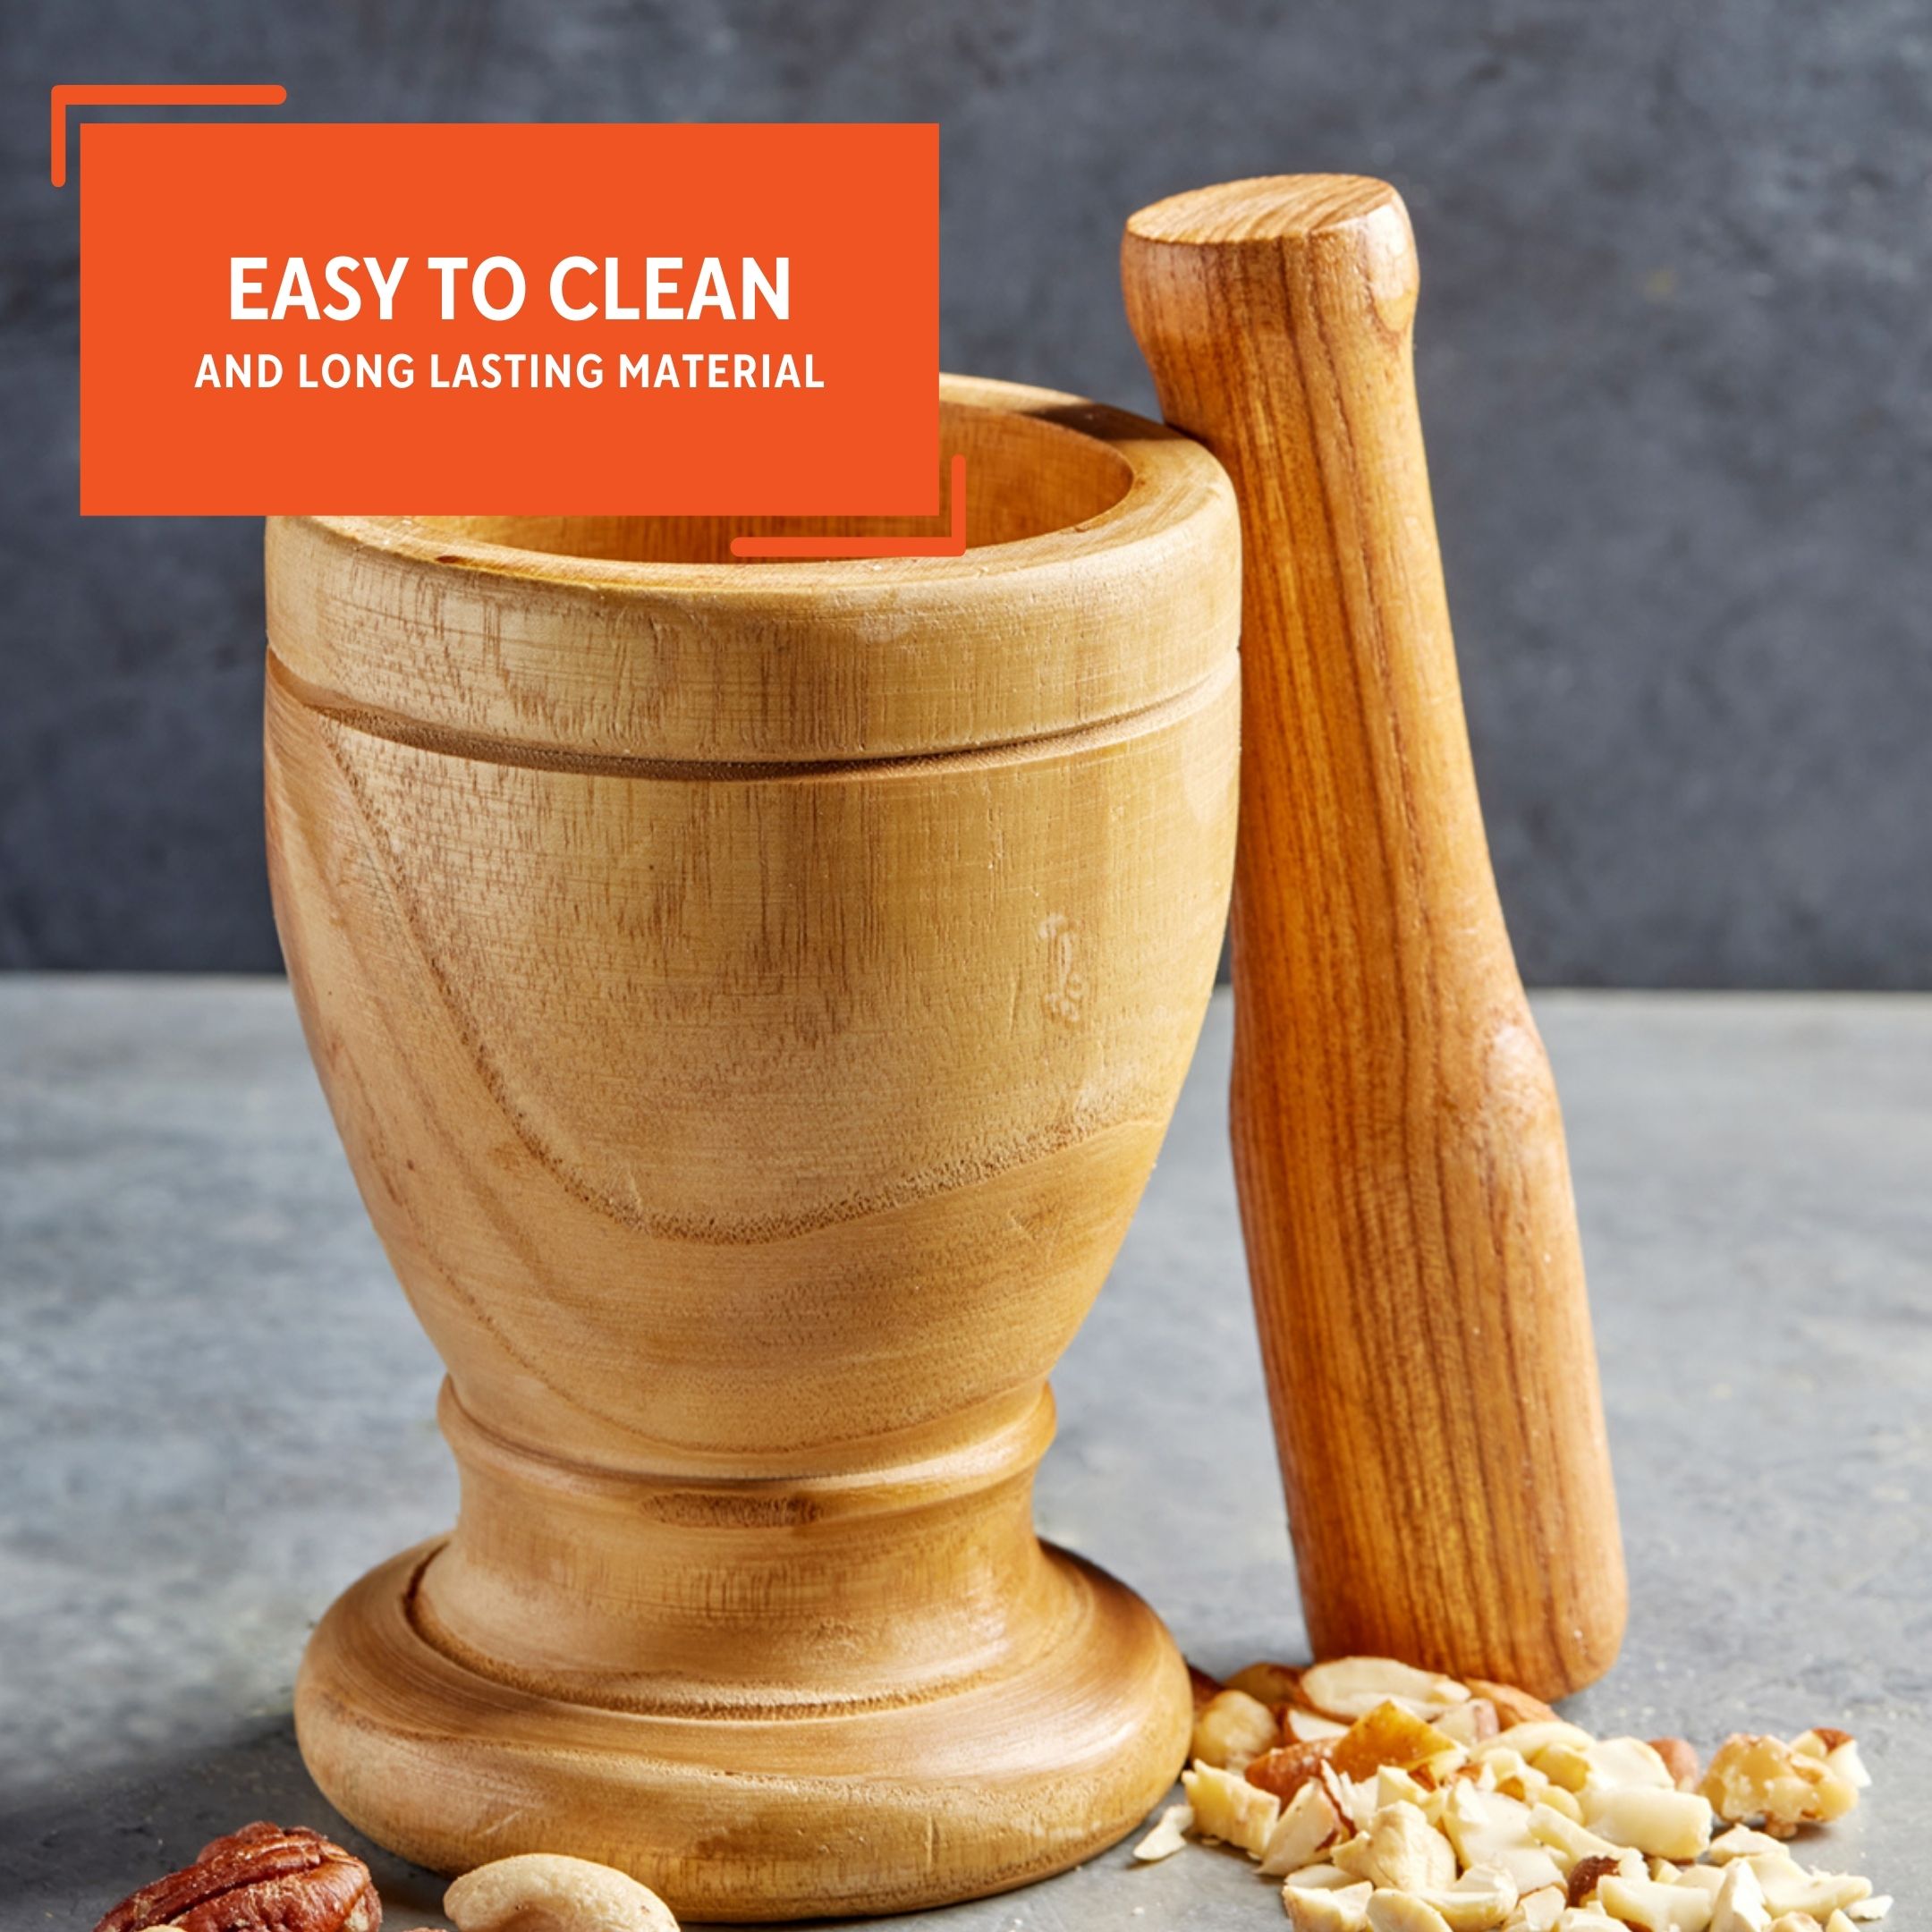 Imusa Small Traditional Wood Mortar and Pestle, Beige - image 5 of 11